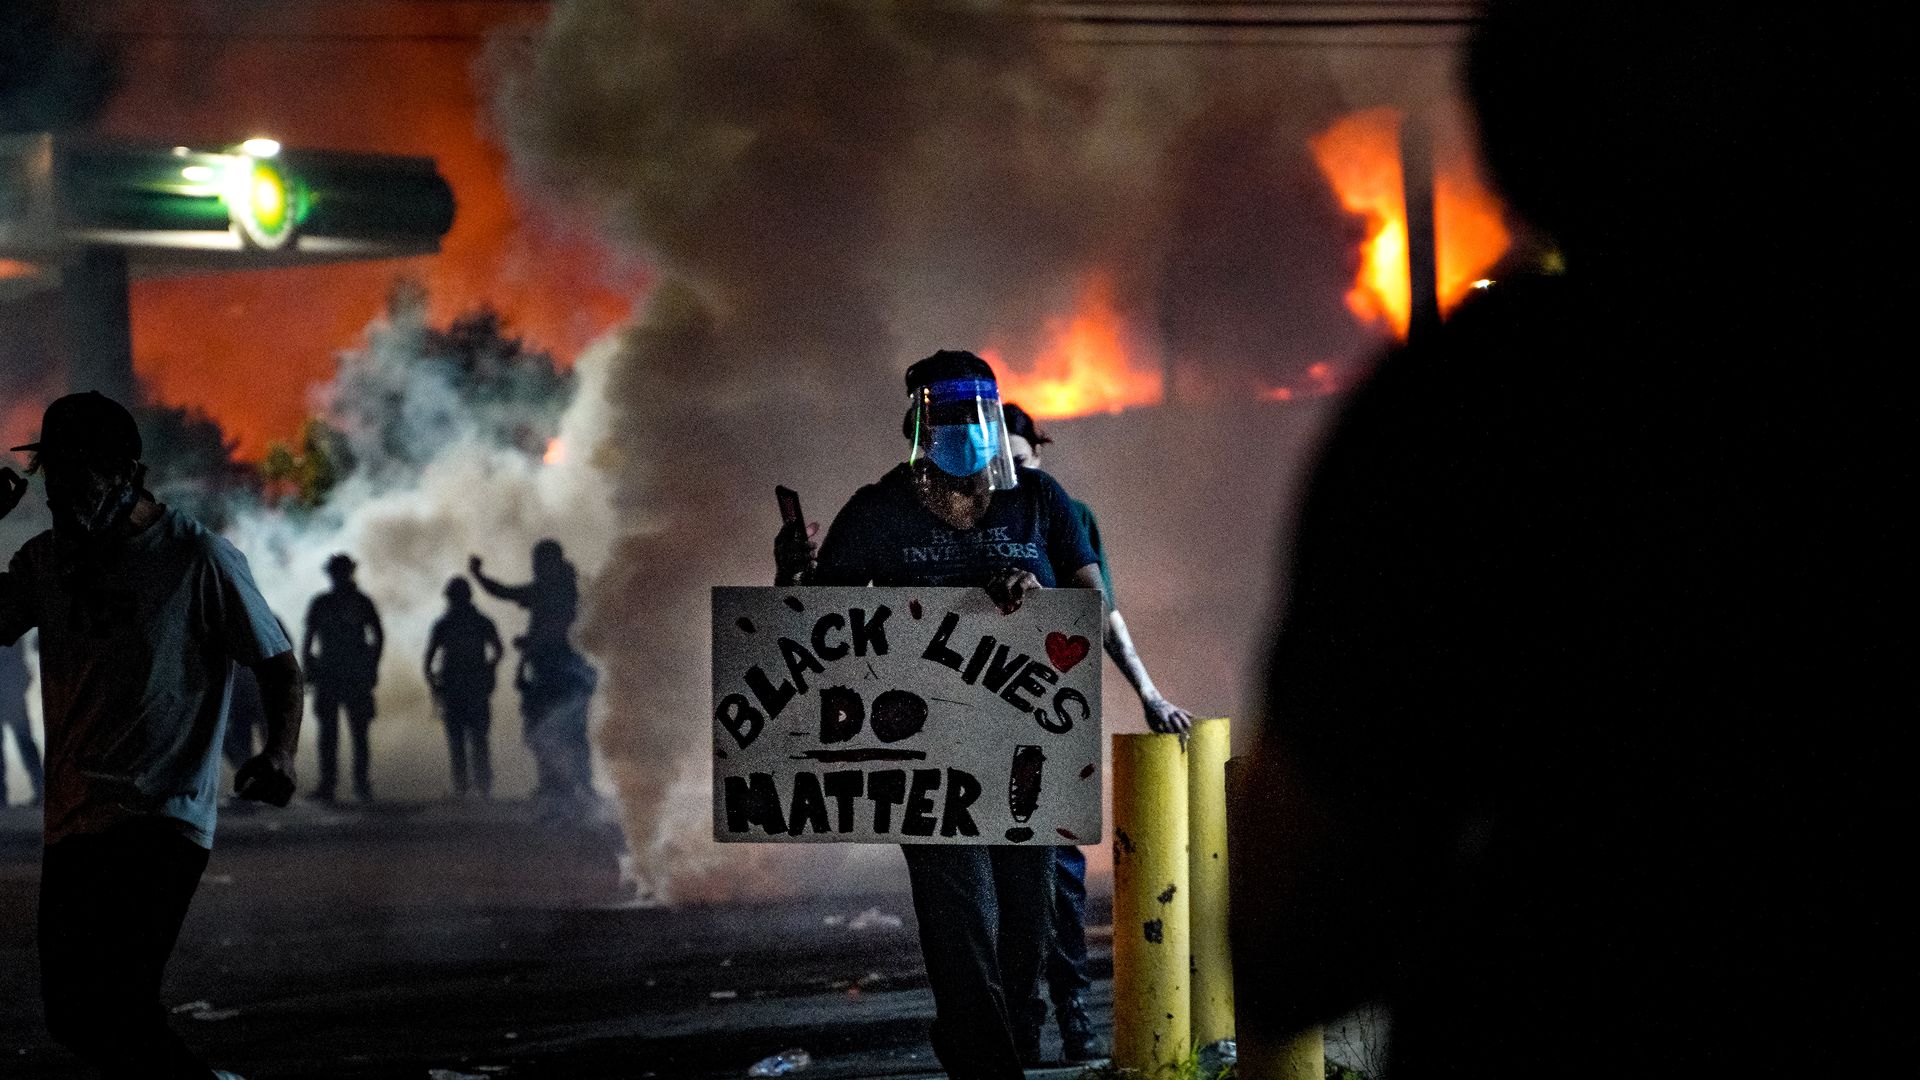 Demonstrators set on fire a restaurant during the protest after an Atlanta police officer shot and killed Rayshard Brooks, 27, at a Wendy's fast food restaurant drive-thy night in Atlanta